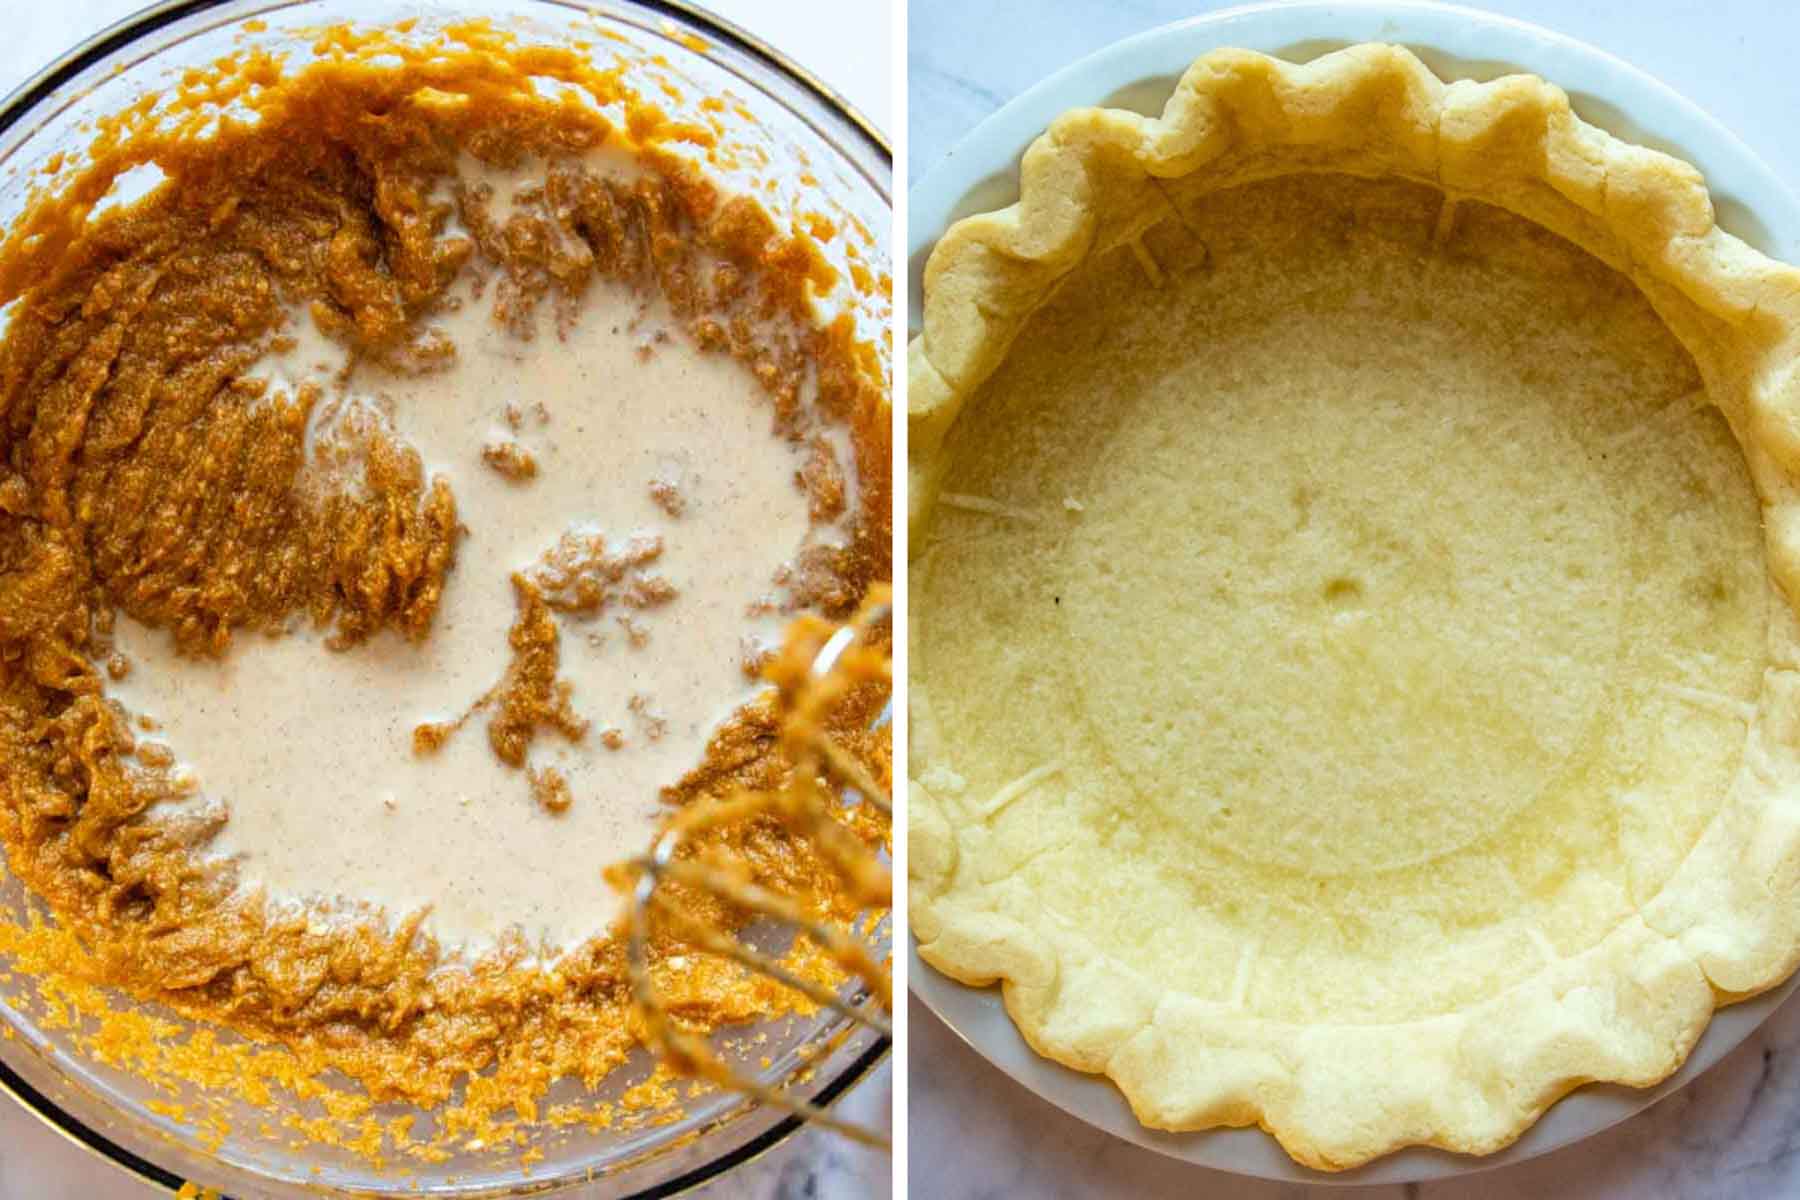 the pie filling in a mixing bowl with a partially baked crust.